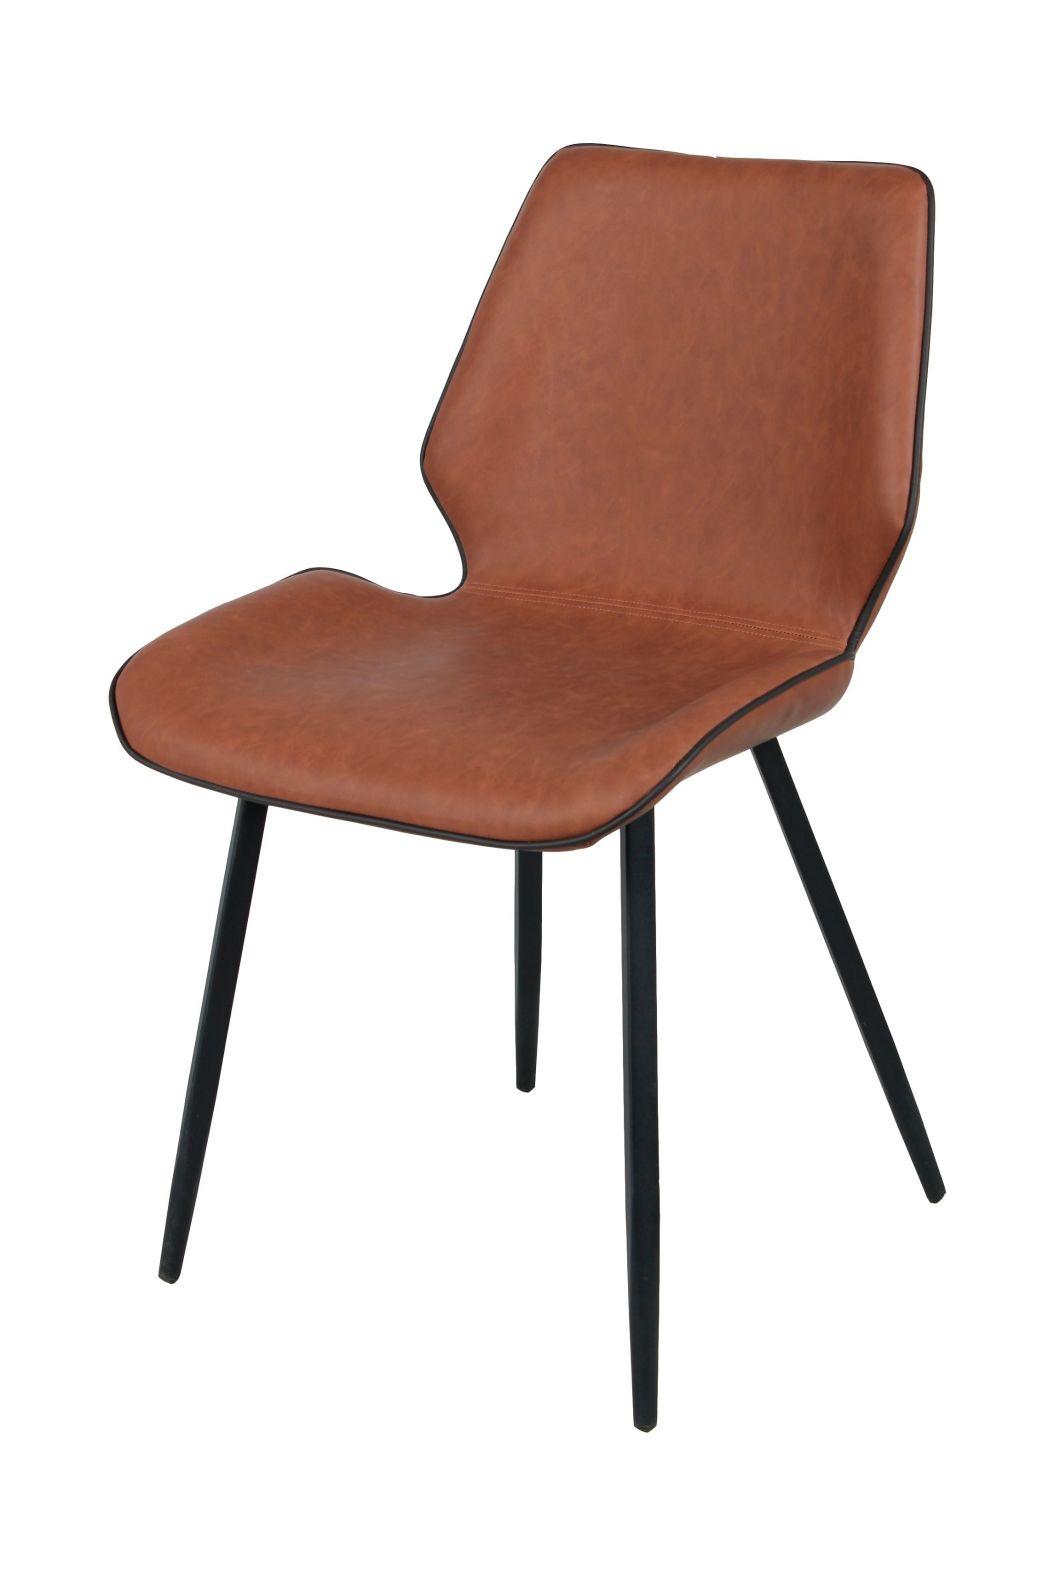 Modern Hot Sale PU Leather Back Hotel Furniture Side Dining Room Chair for Cafe